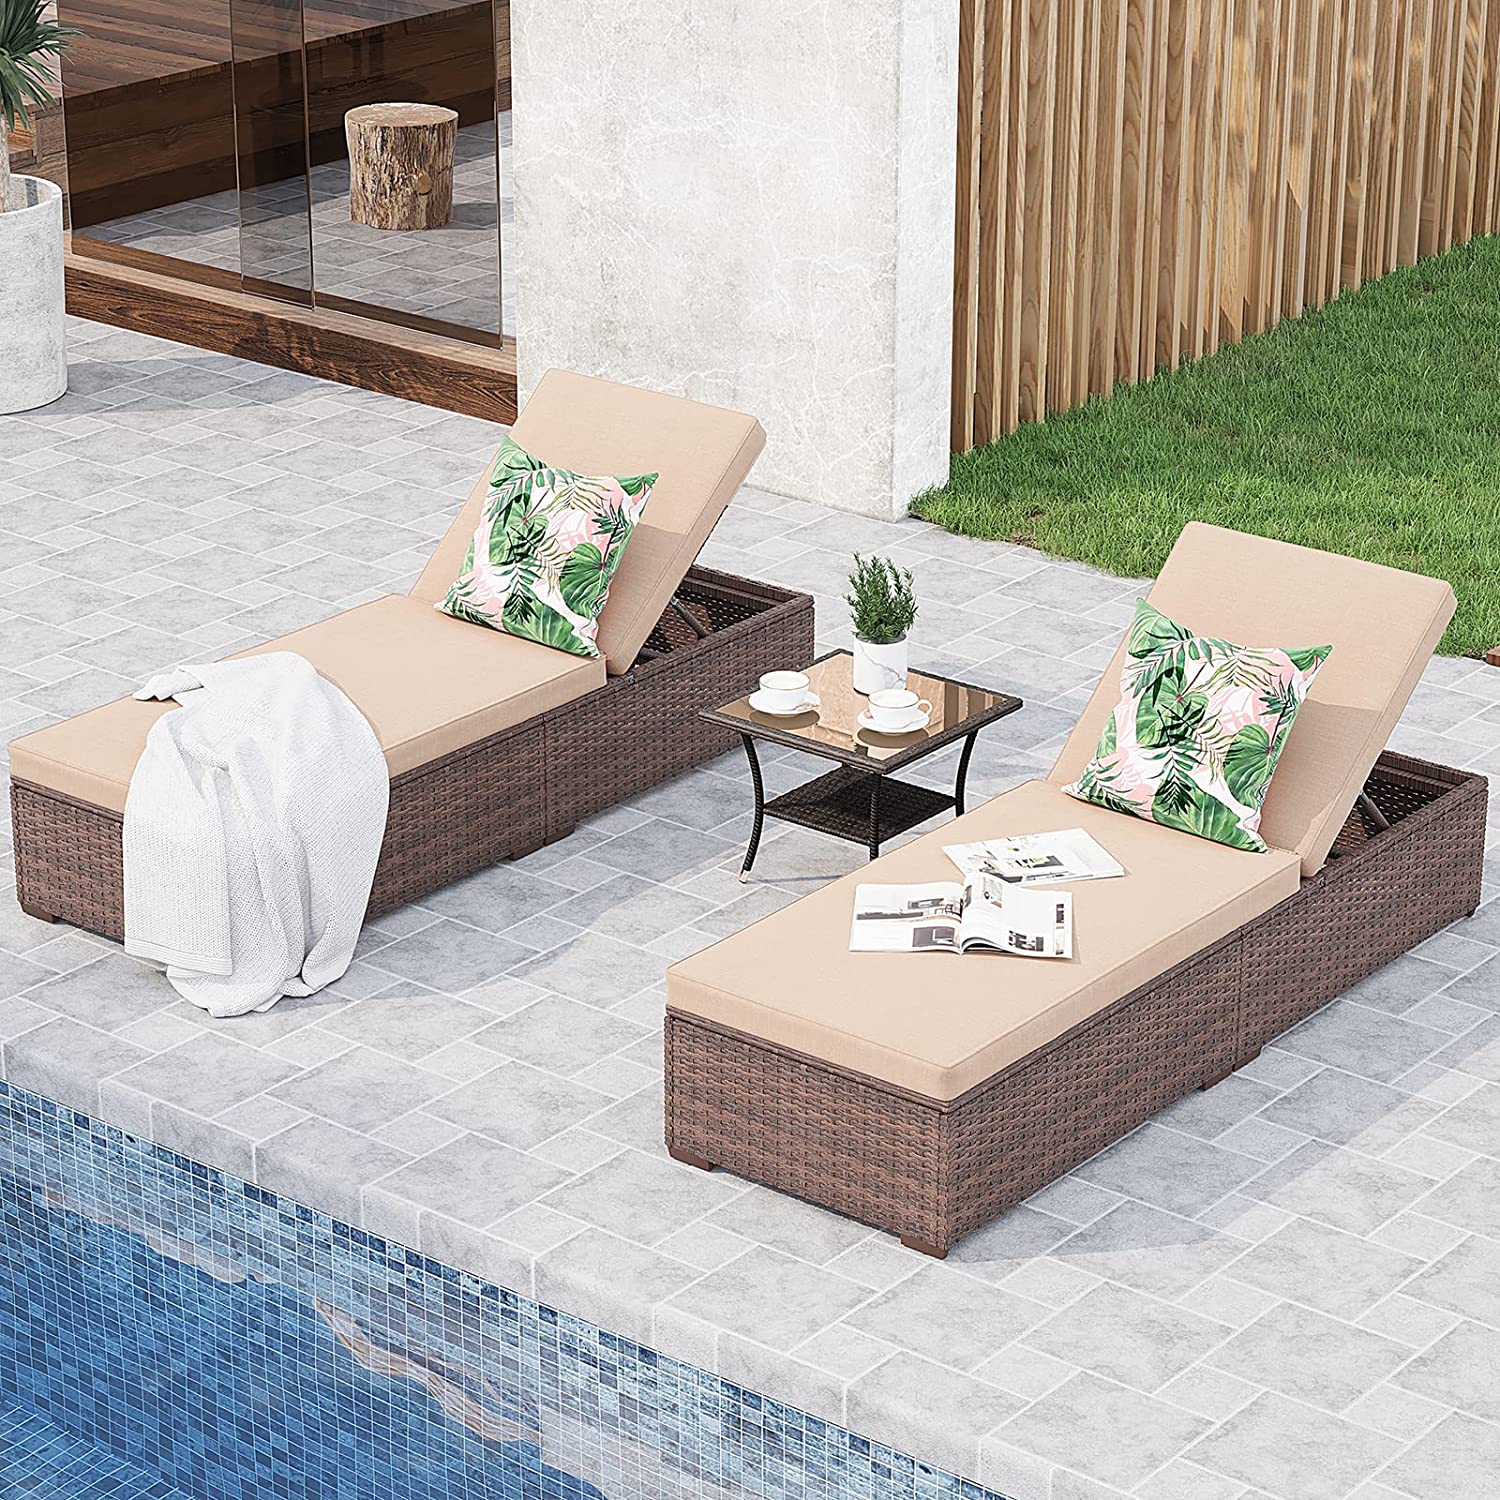 Outdoor Chaise Lounge Chair, 3 Piece Patio Reclining Sun Lounger with Coffee Table, All Weather PE Rattan Adjustable Lounge Chair, Patio Pool Lounge Chairs with Removable Cushion, Beige - image 1 of 7